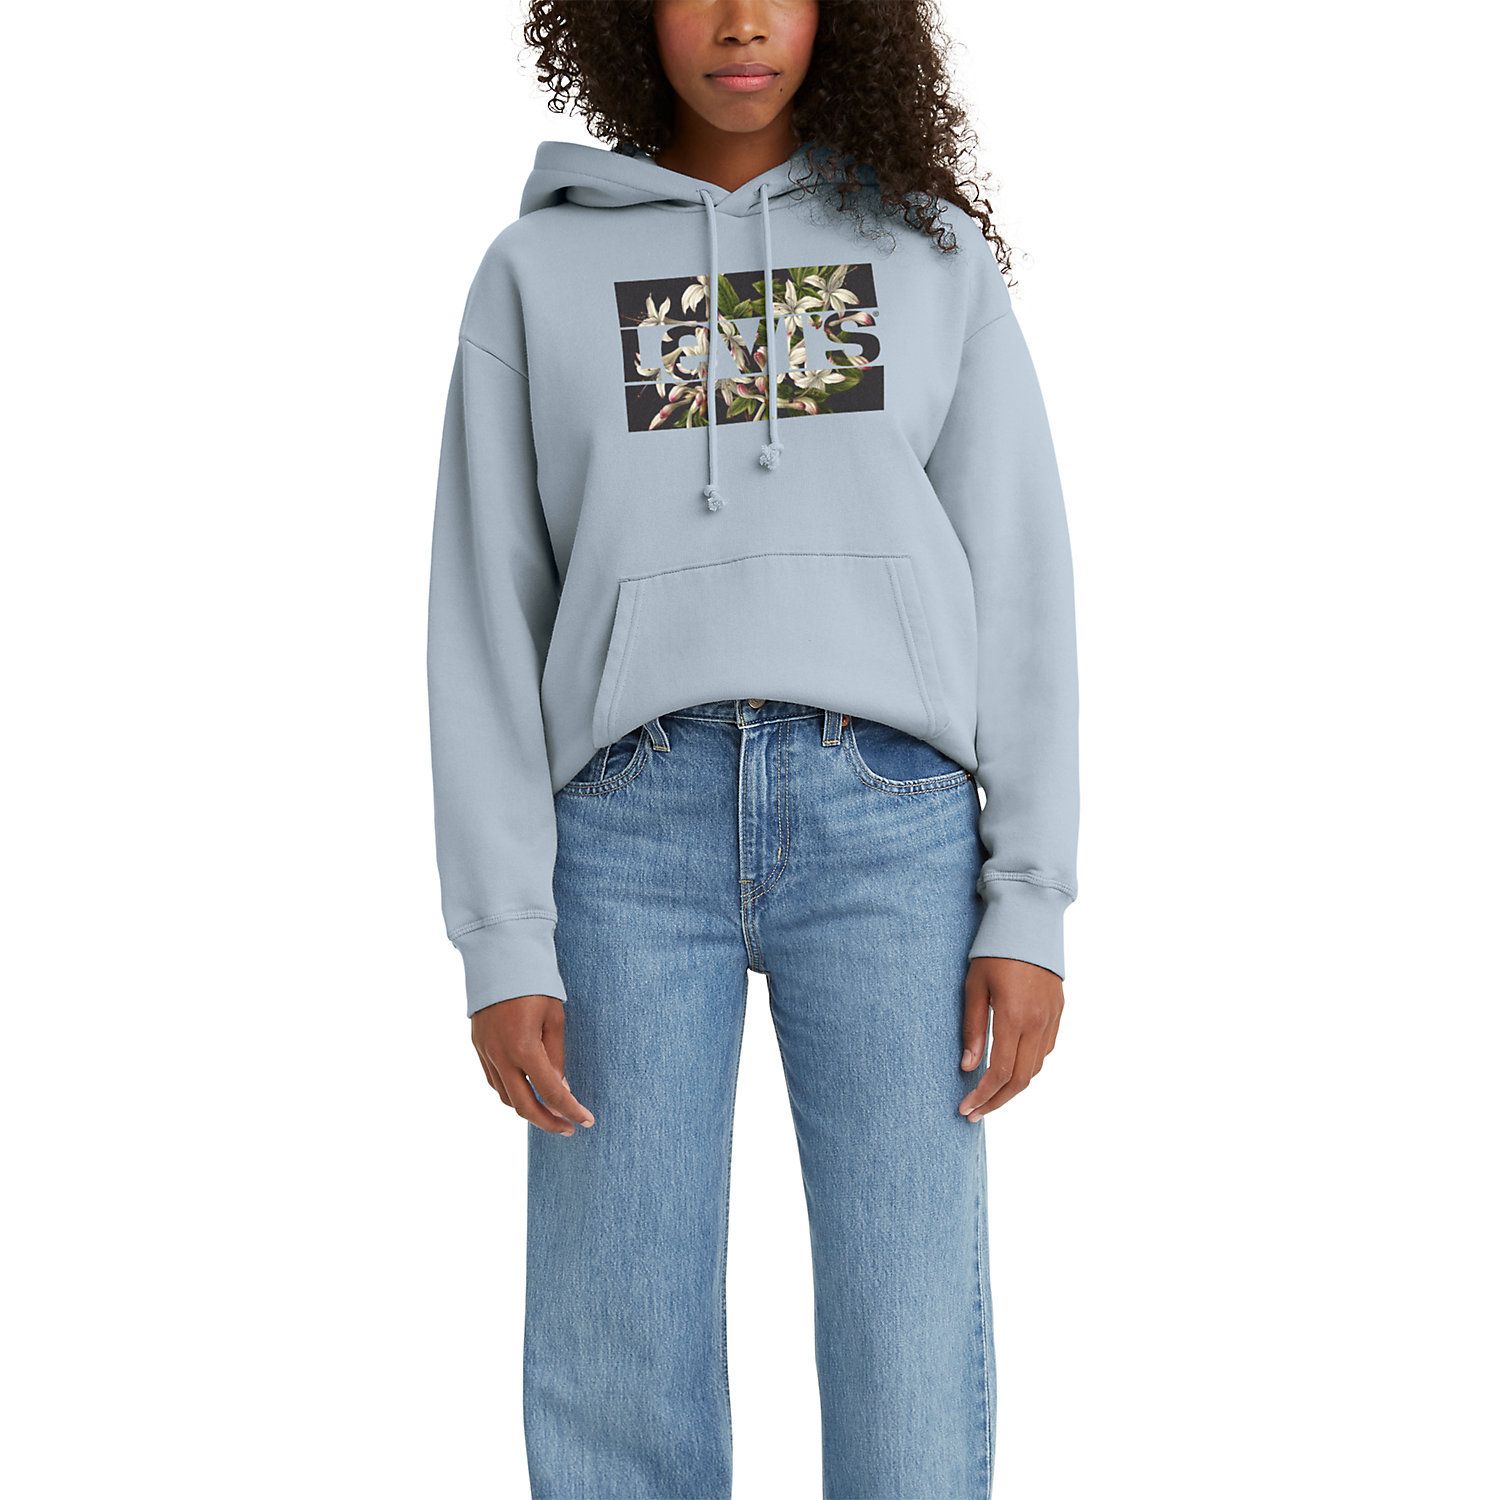 Image for Levi's Women's Standard Hoodie at Kohl's.